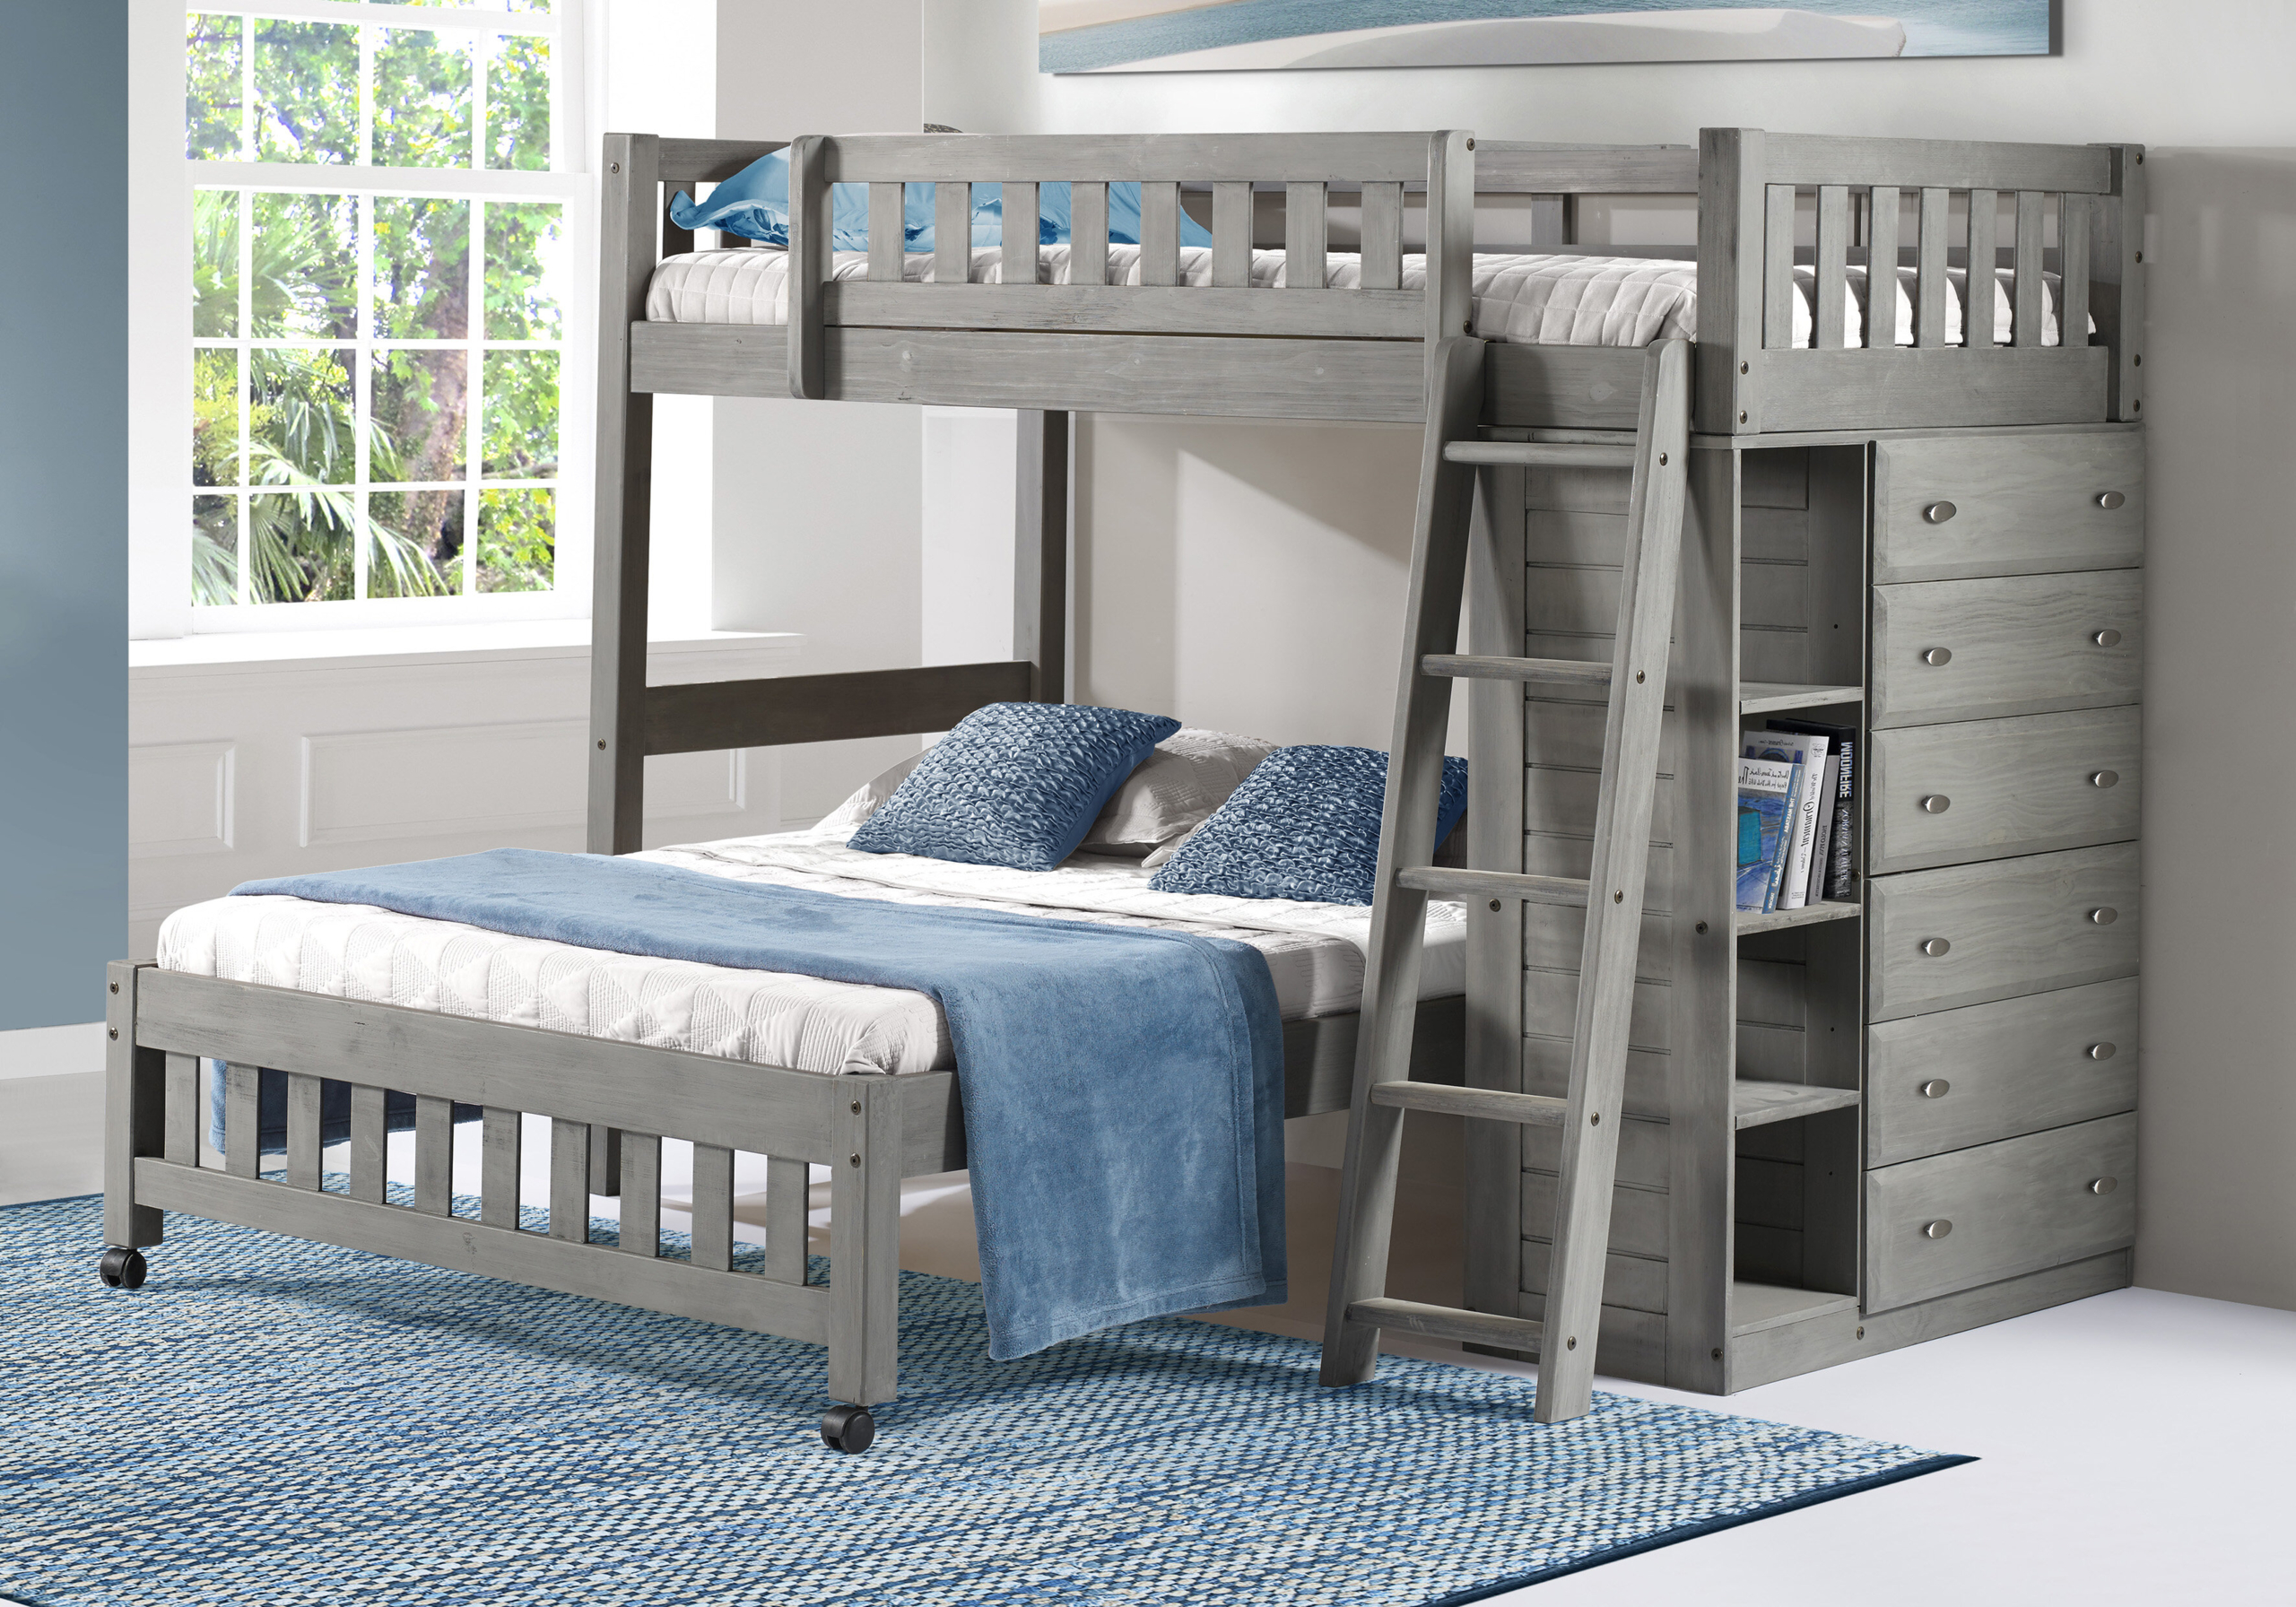 Bunk Beds With Dressers Visualhunt, Rooms To Go Bunk Beds With Desk